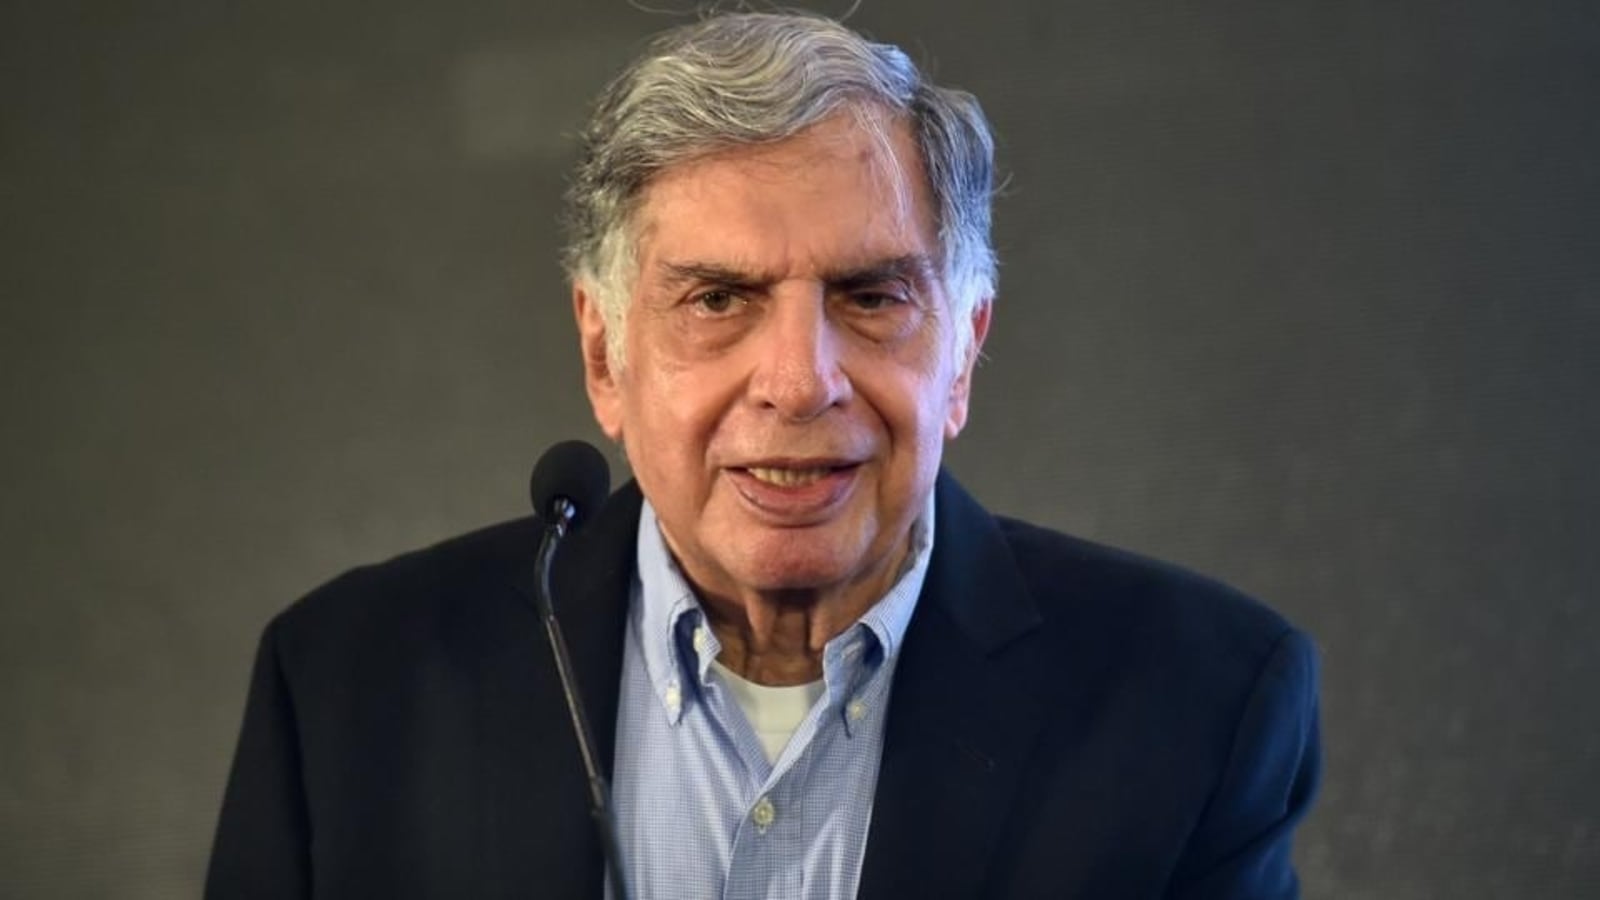 1545 Ratan Tata Chairman Stock Photos HighRes Pictures and Images   Getty Images